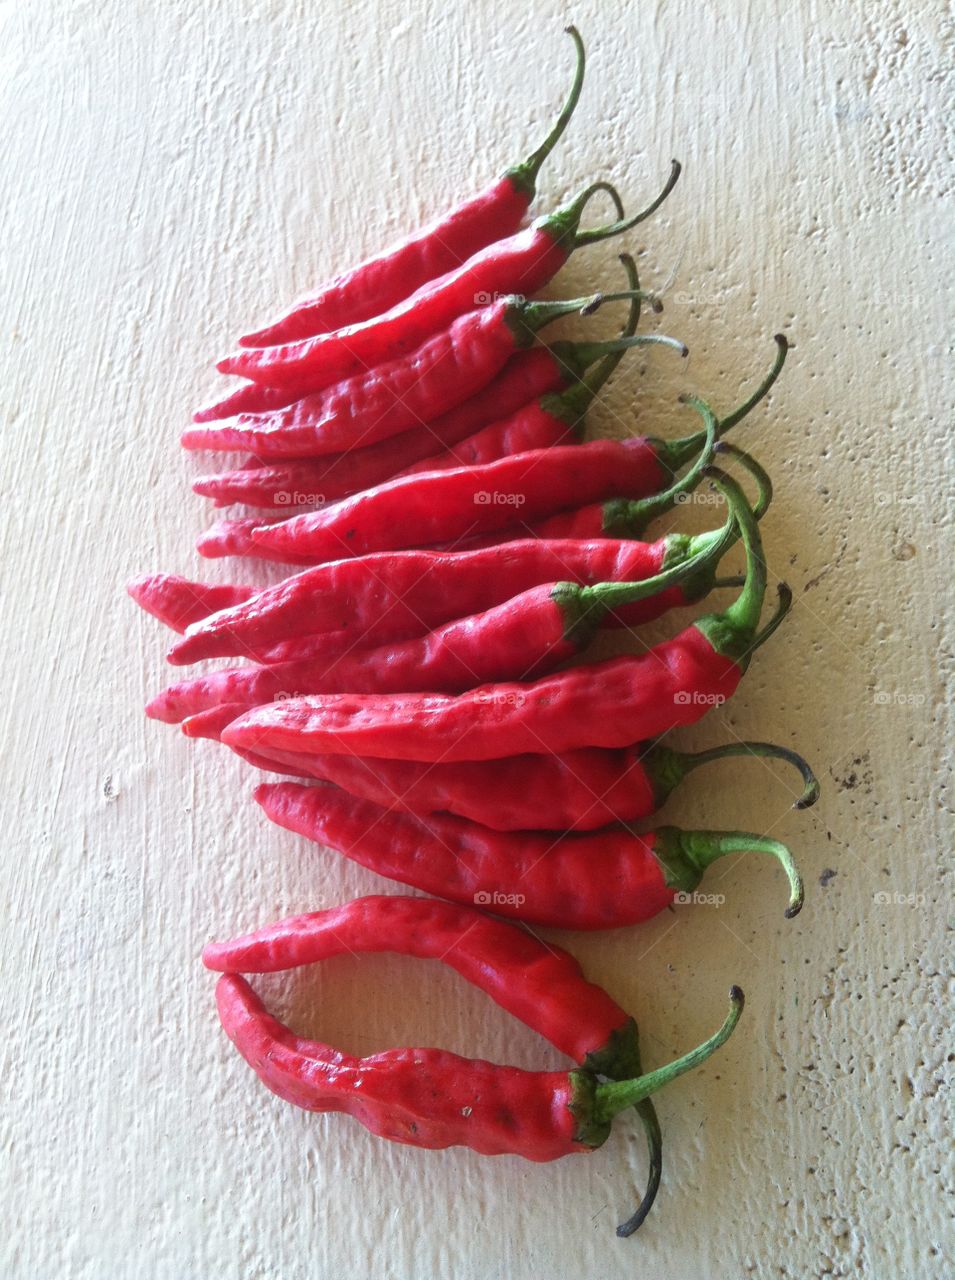 Chillies for healthy eating. Red chillies